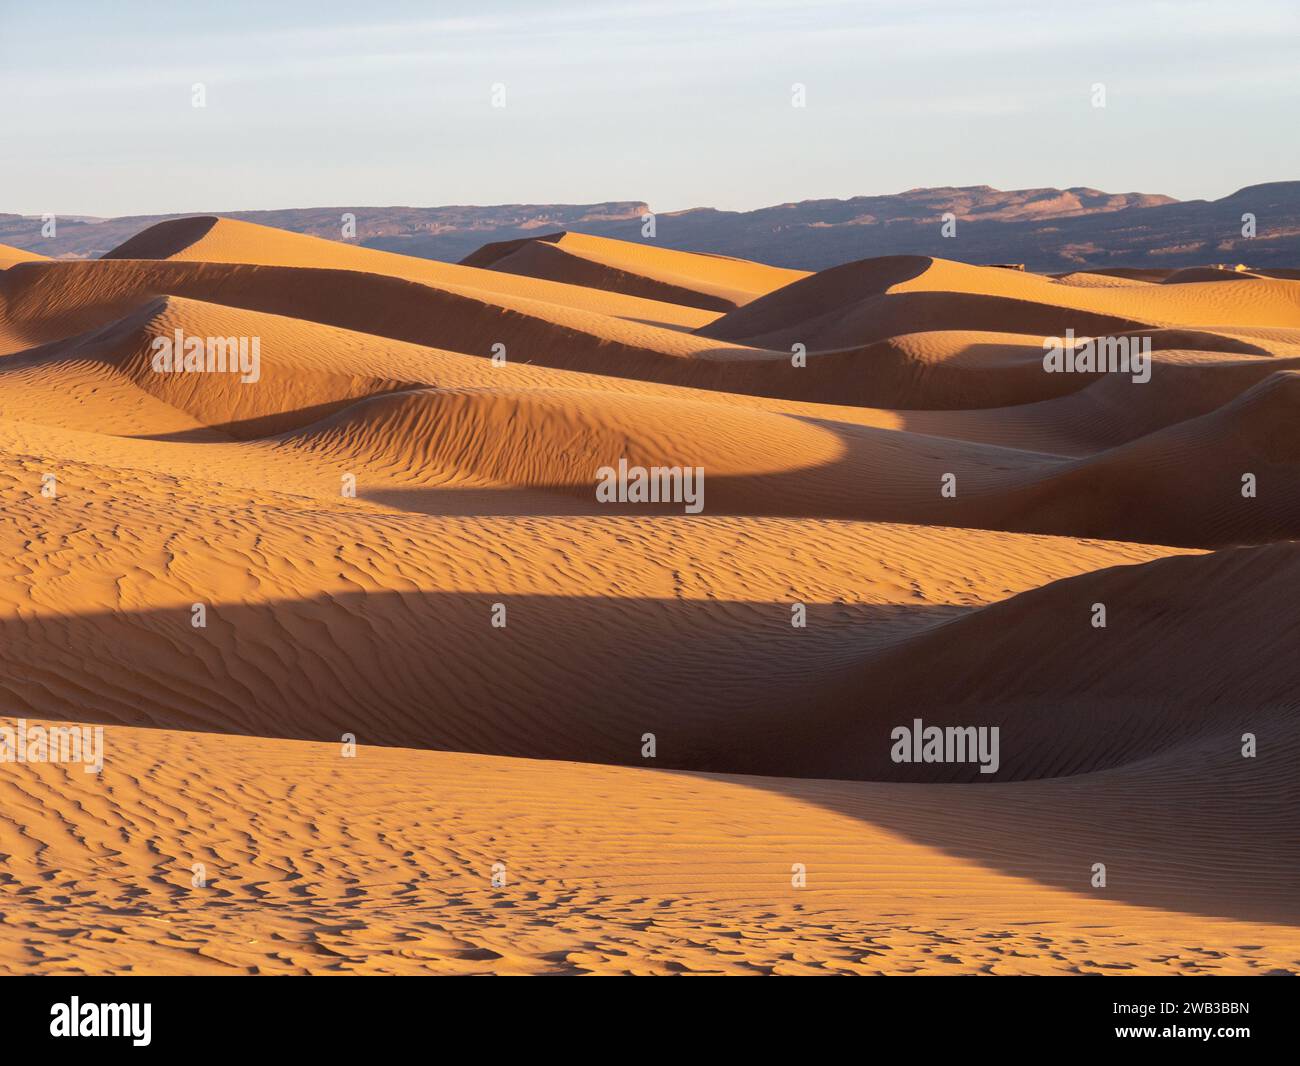 Dunes in Zagora province, Morocco, during sunset - Landscape 3 Stock Photo